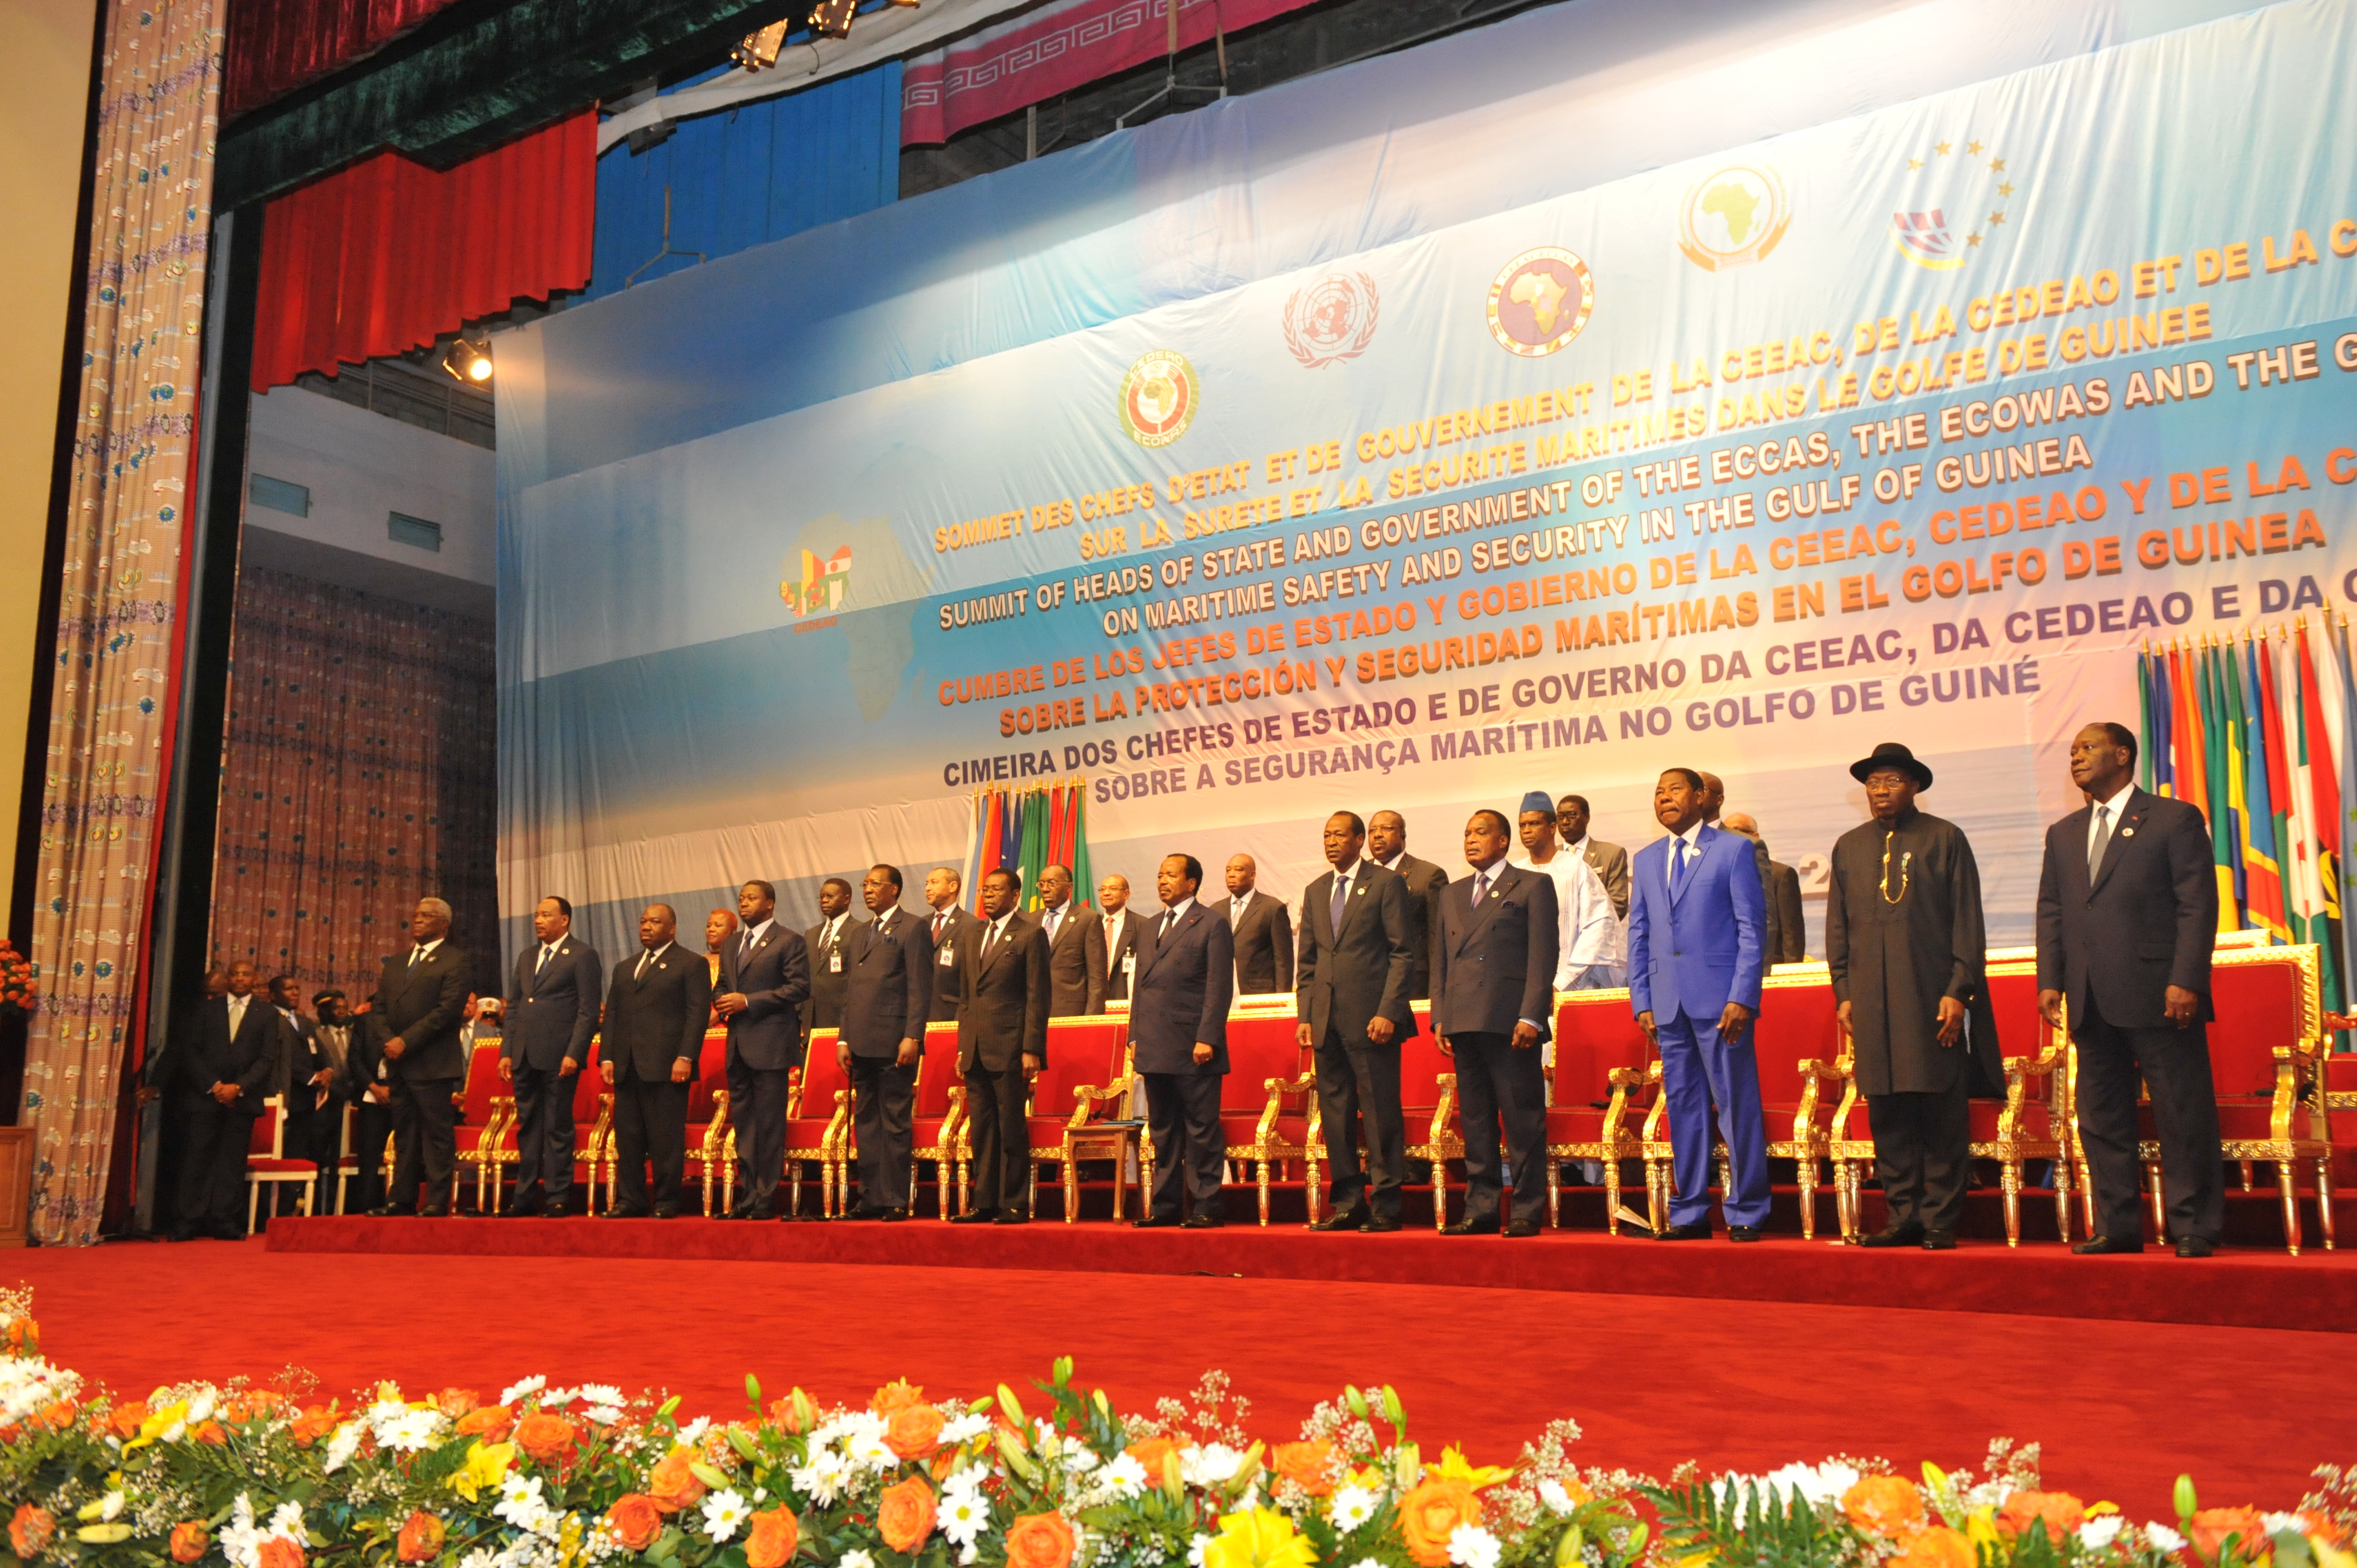 Opening ceremonies of the Summit of Heads of State and Government of ECCAS, ECOWAS and GGC